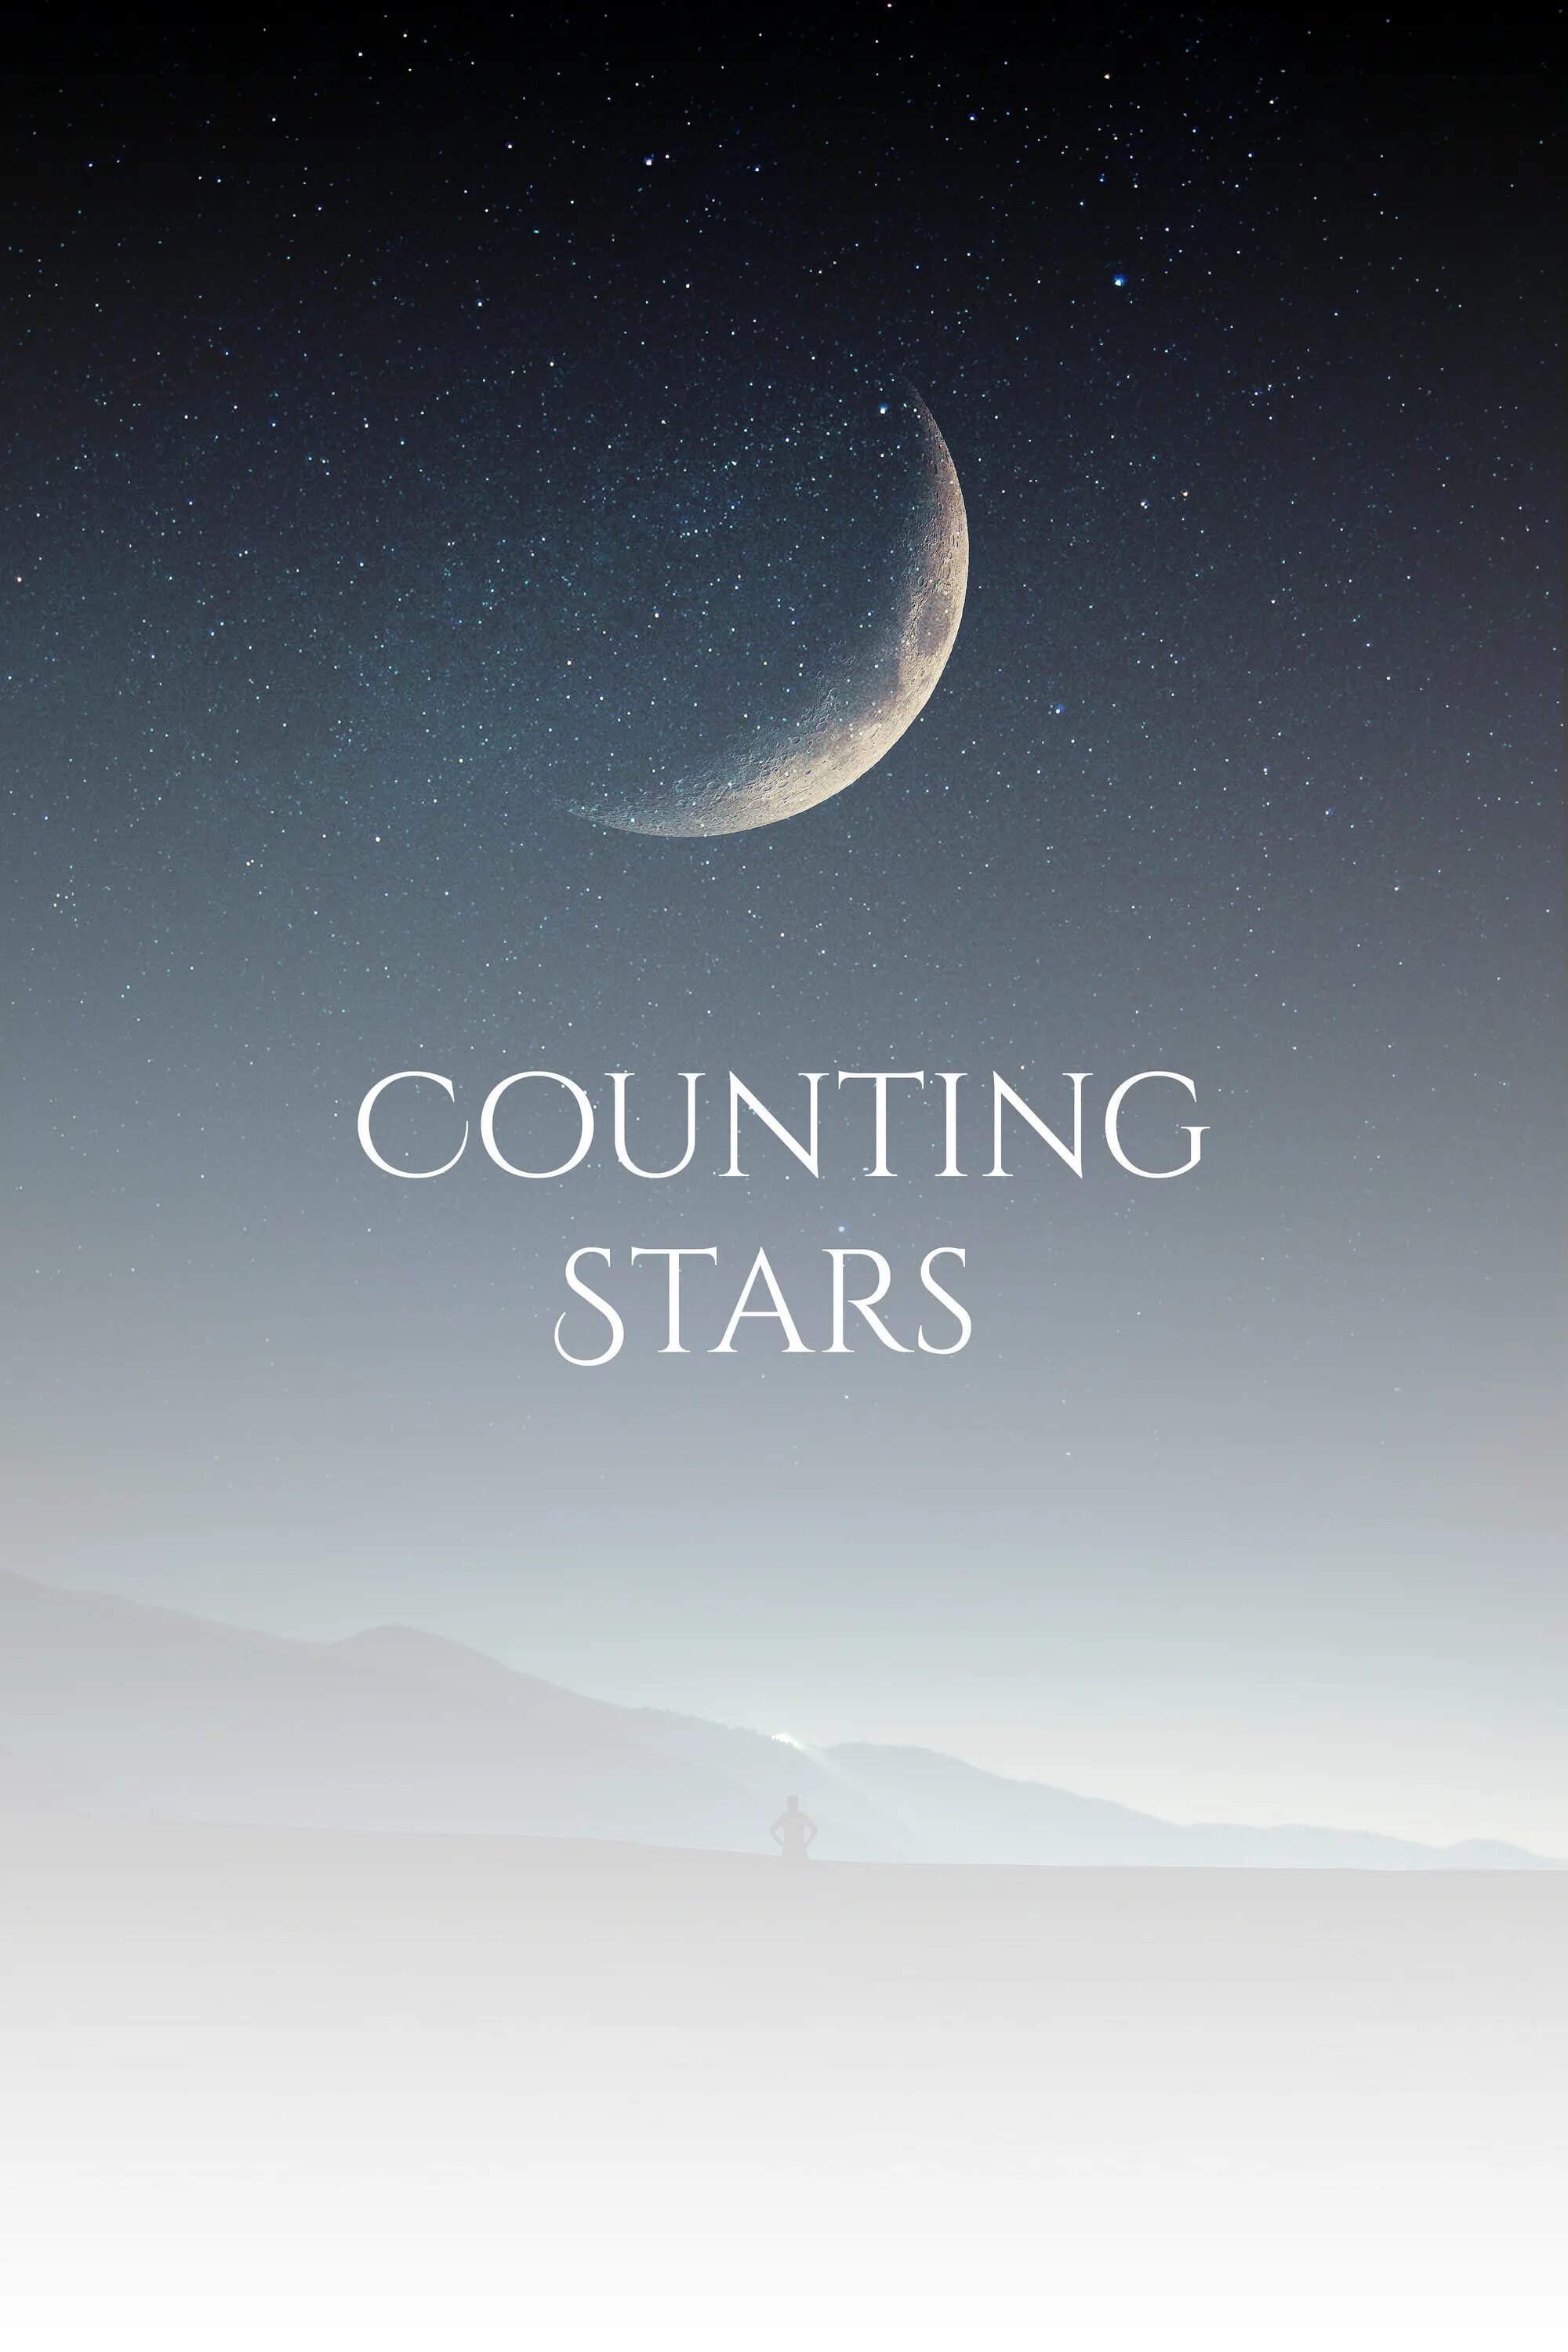 Counting stars simply. Counting the Stars. Counting Stars ONEREPUBLIC. Counting Stars обложка. Beo counting Star.